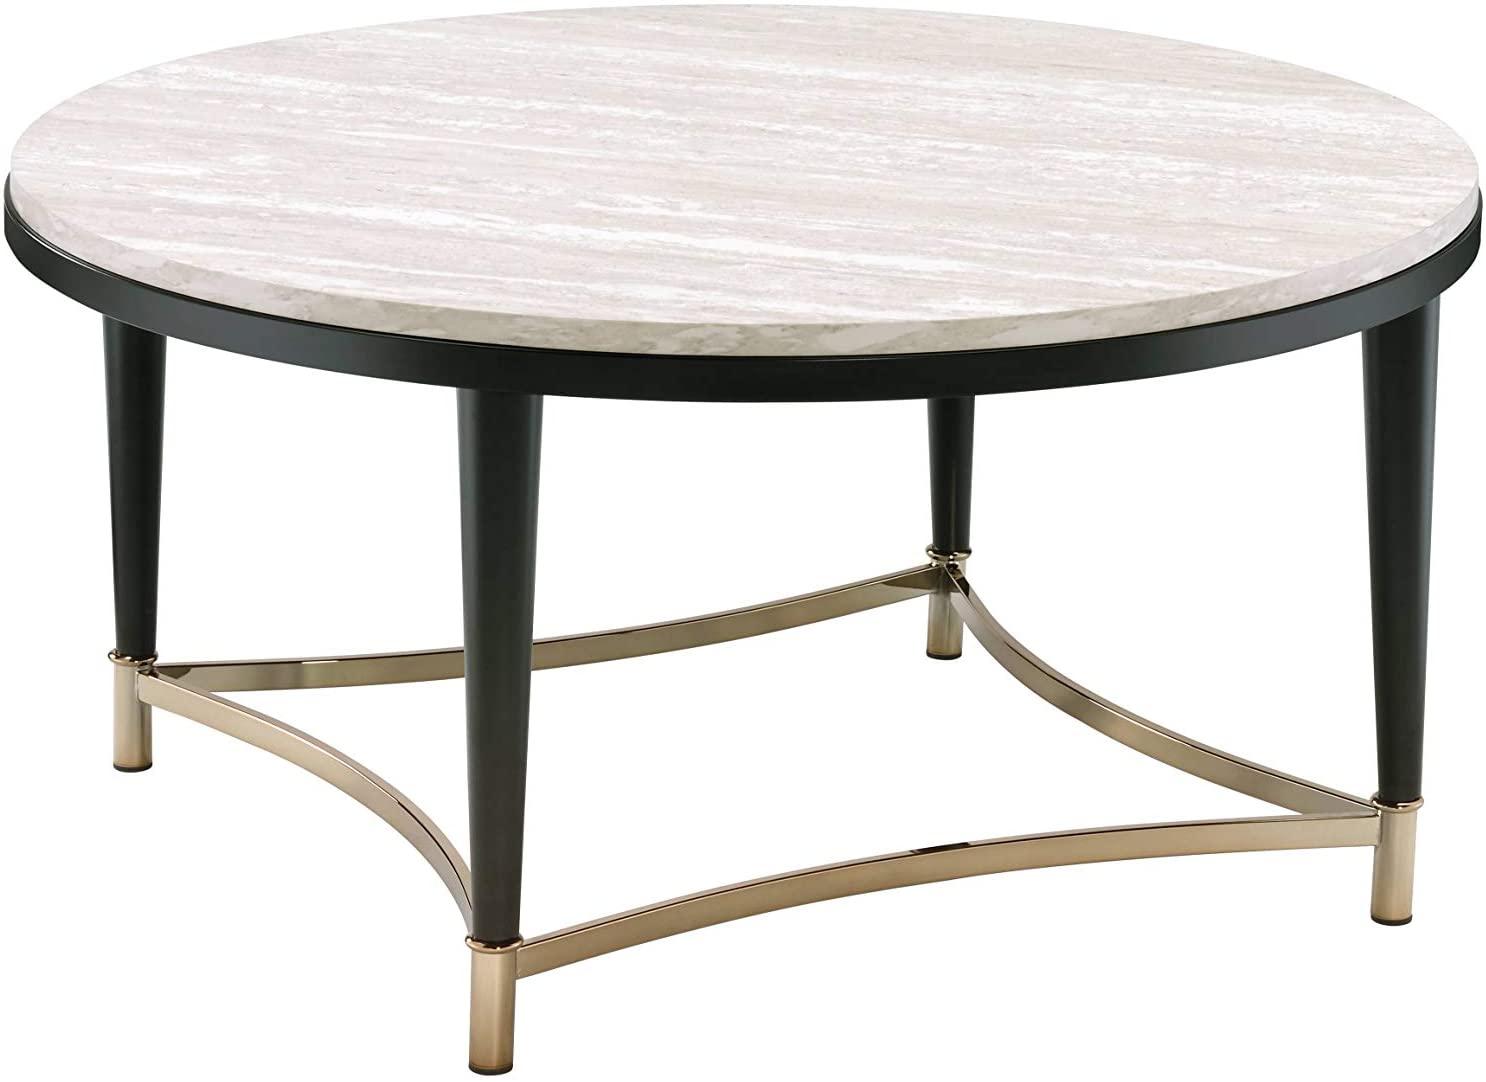 Modern Coffee Table Ayser 85380 in White 